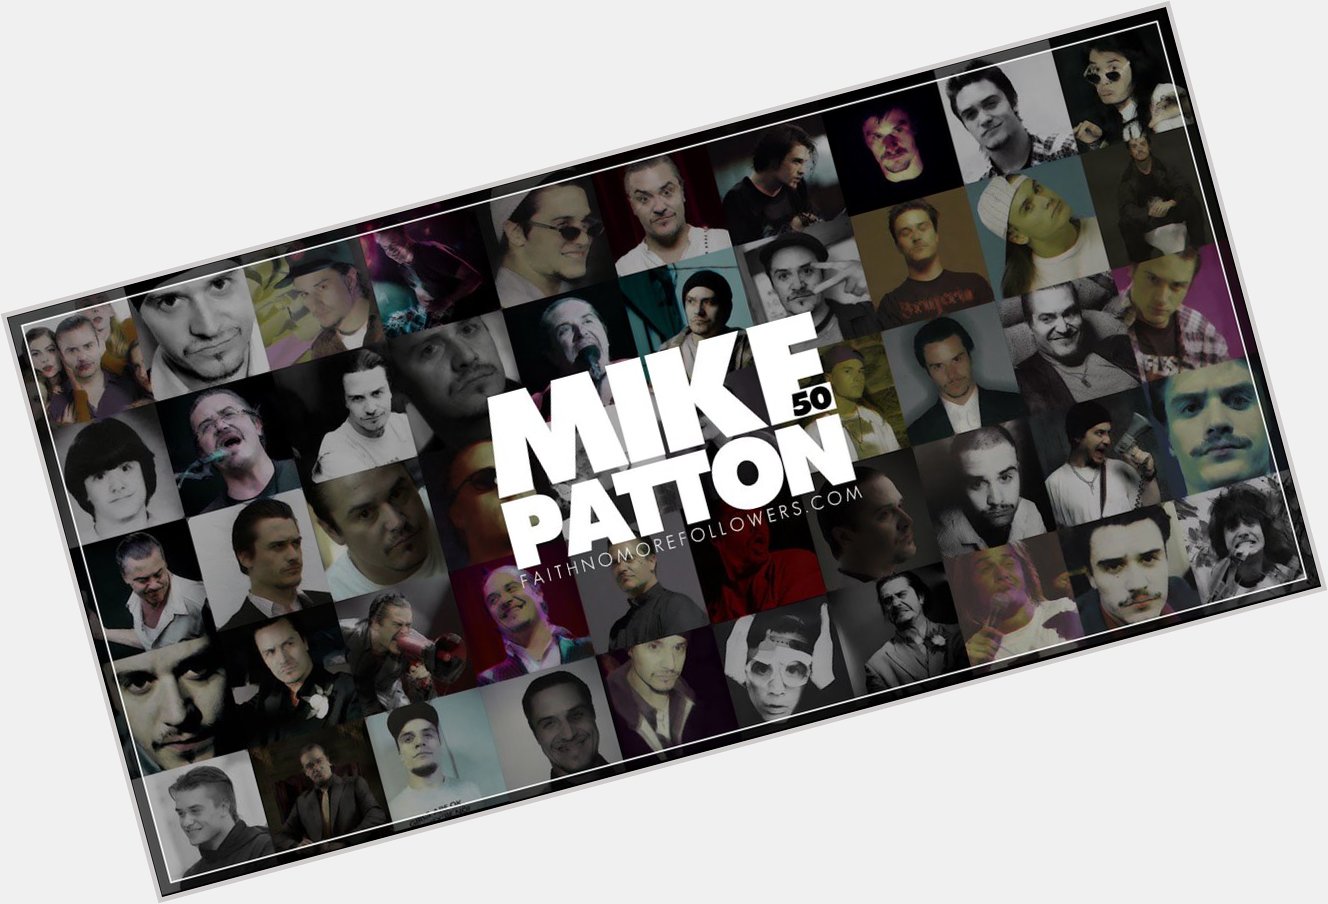 Happy birthday 50th Mike Patton! Read his history. 